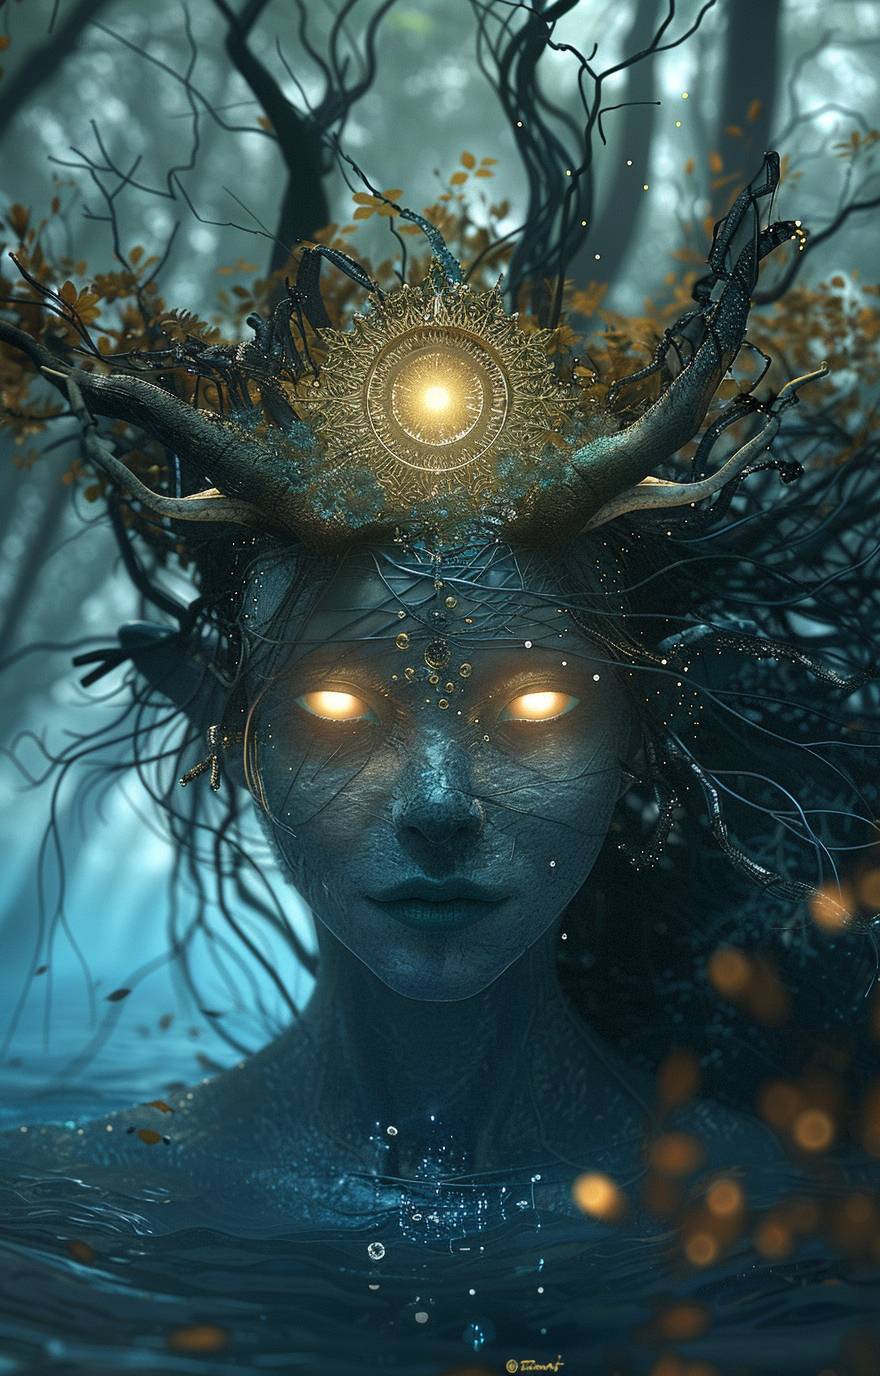 A blue alien woman with glowing yellow eyes and hair made of vines, wearing an elaborate gold crown that is shaped like the sun in front of her head. She has two small black horns on top of each side of her forehead, standing under water with trees visible behind her, in the digital art style.